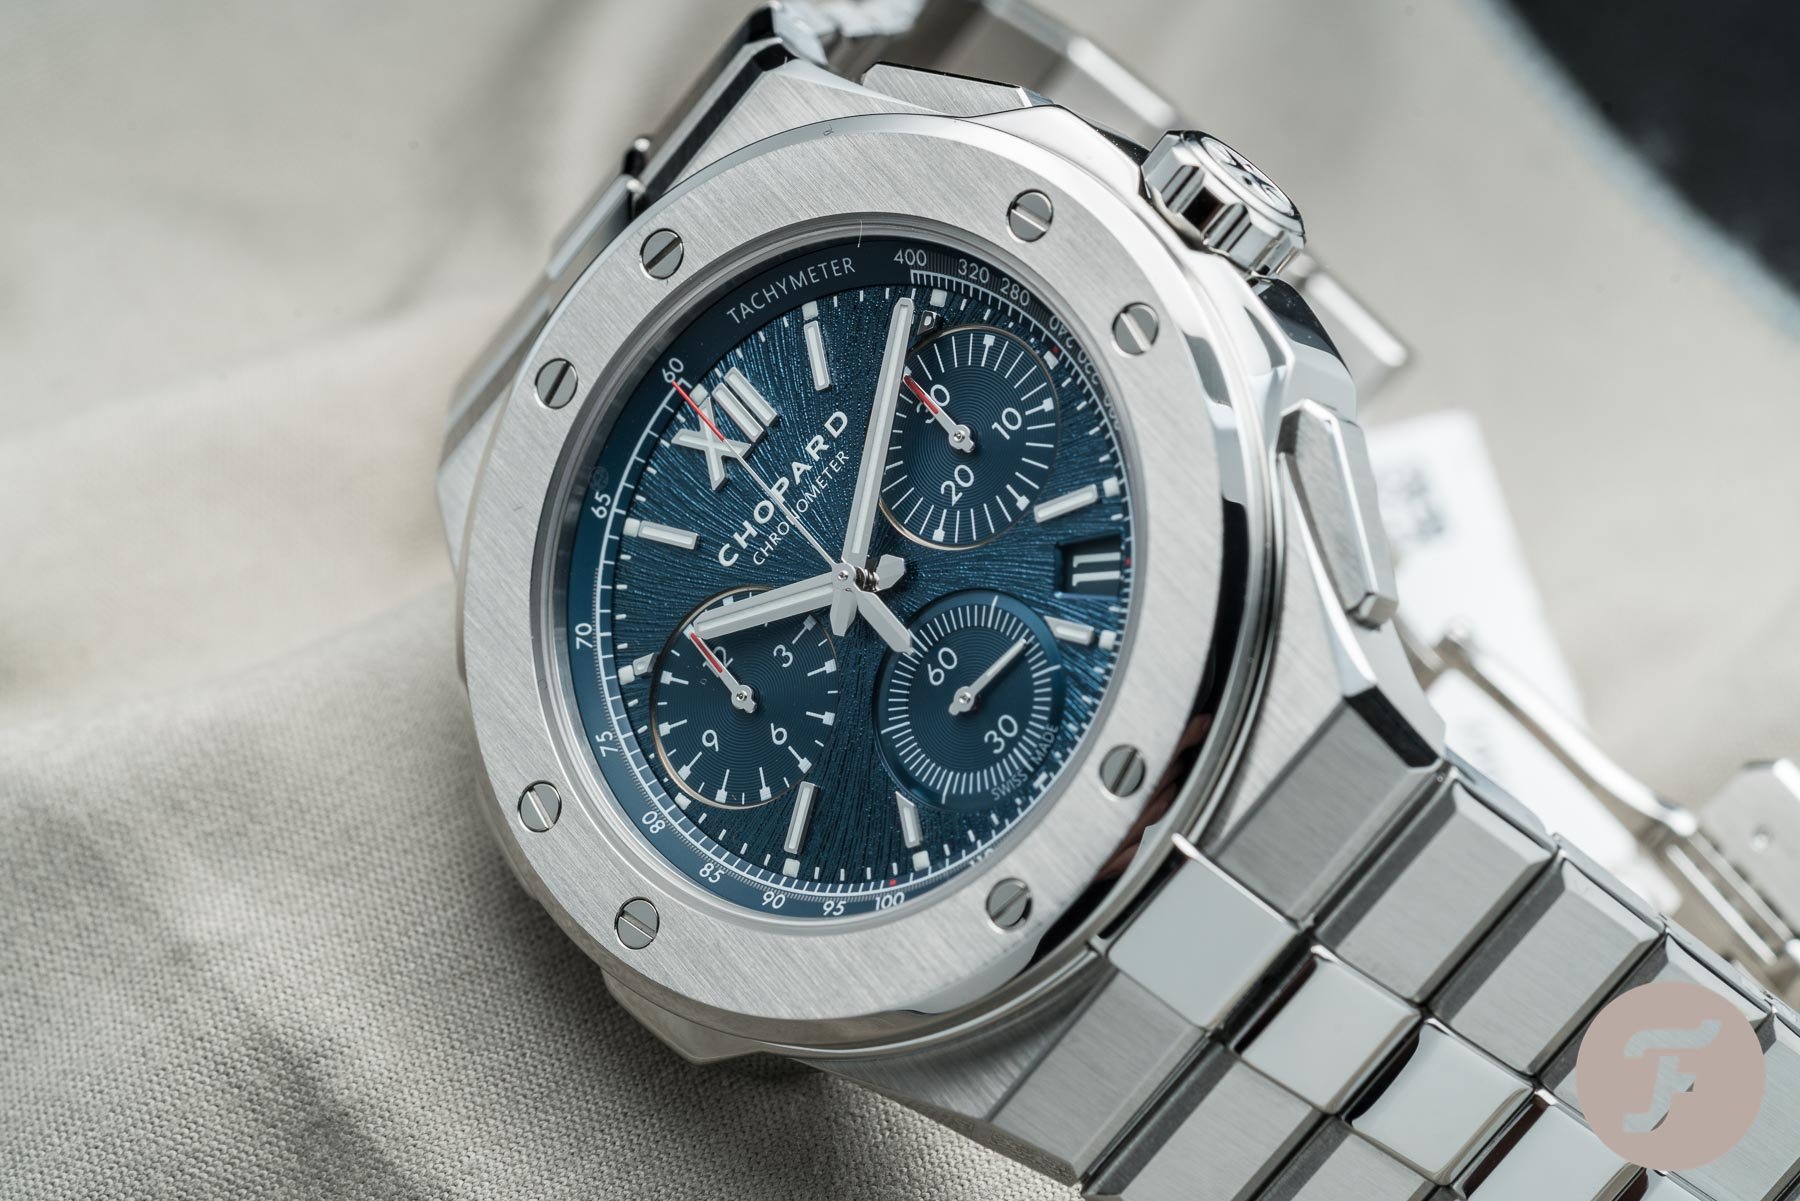 Introducing The Chopard Alpine Eagle XL Flyback Chrono Watches –   – Featuring Watch Reviews, Critiques, Reports & News